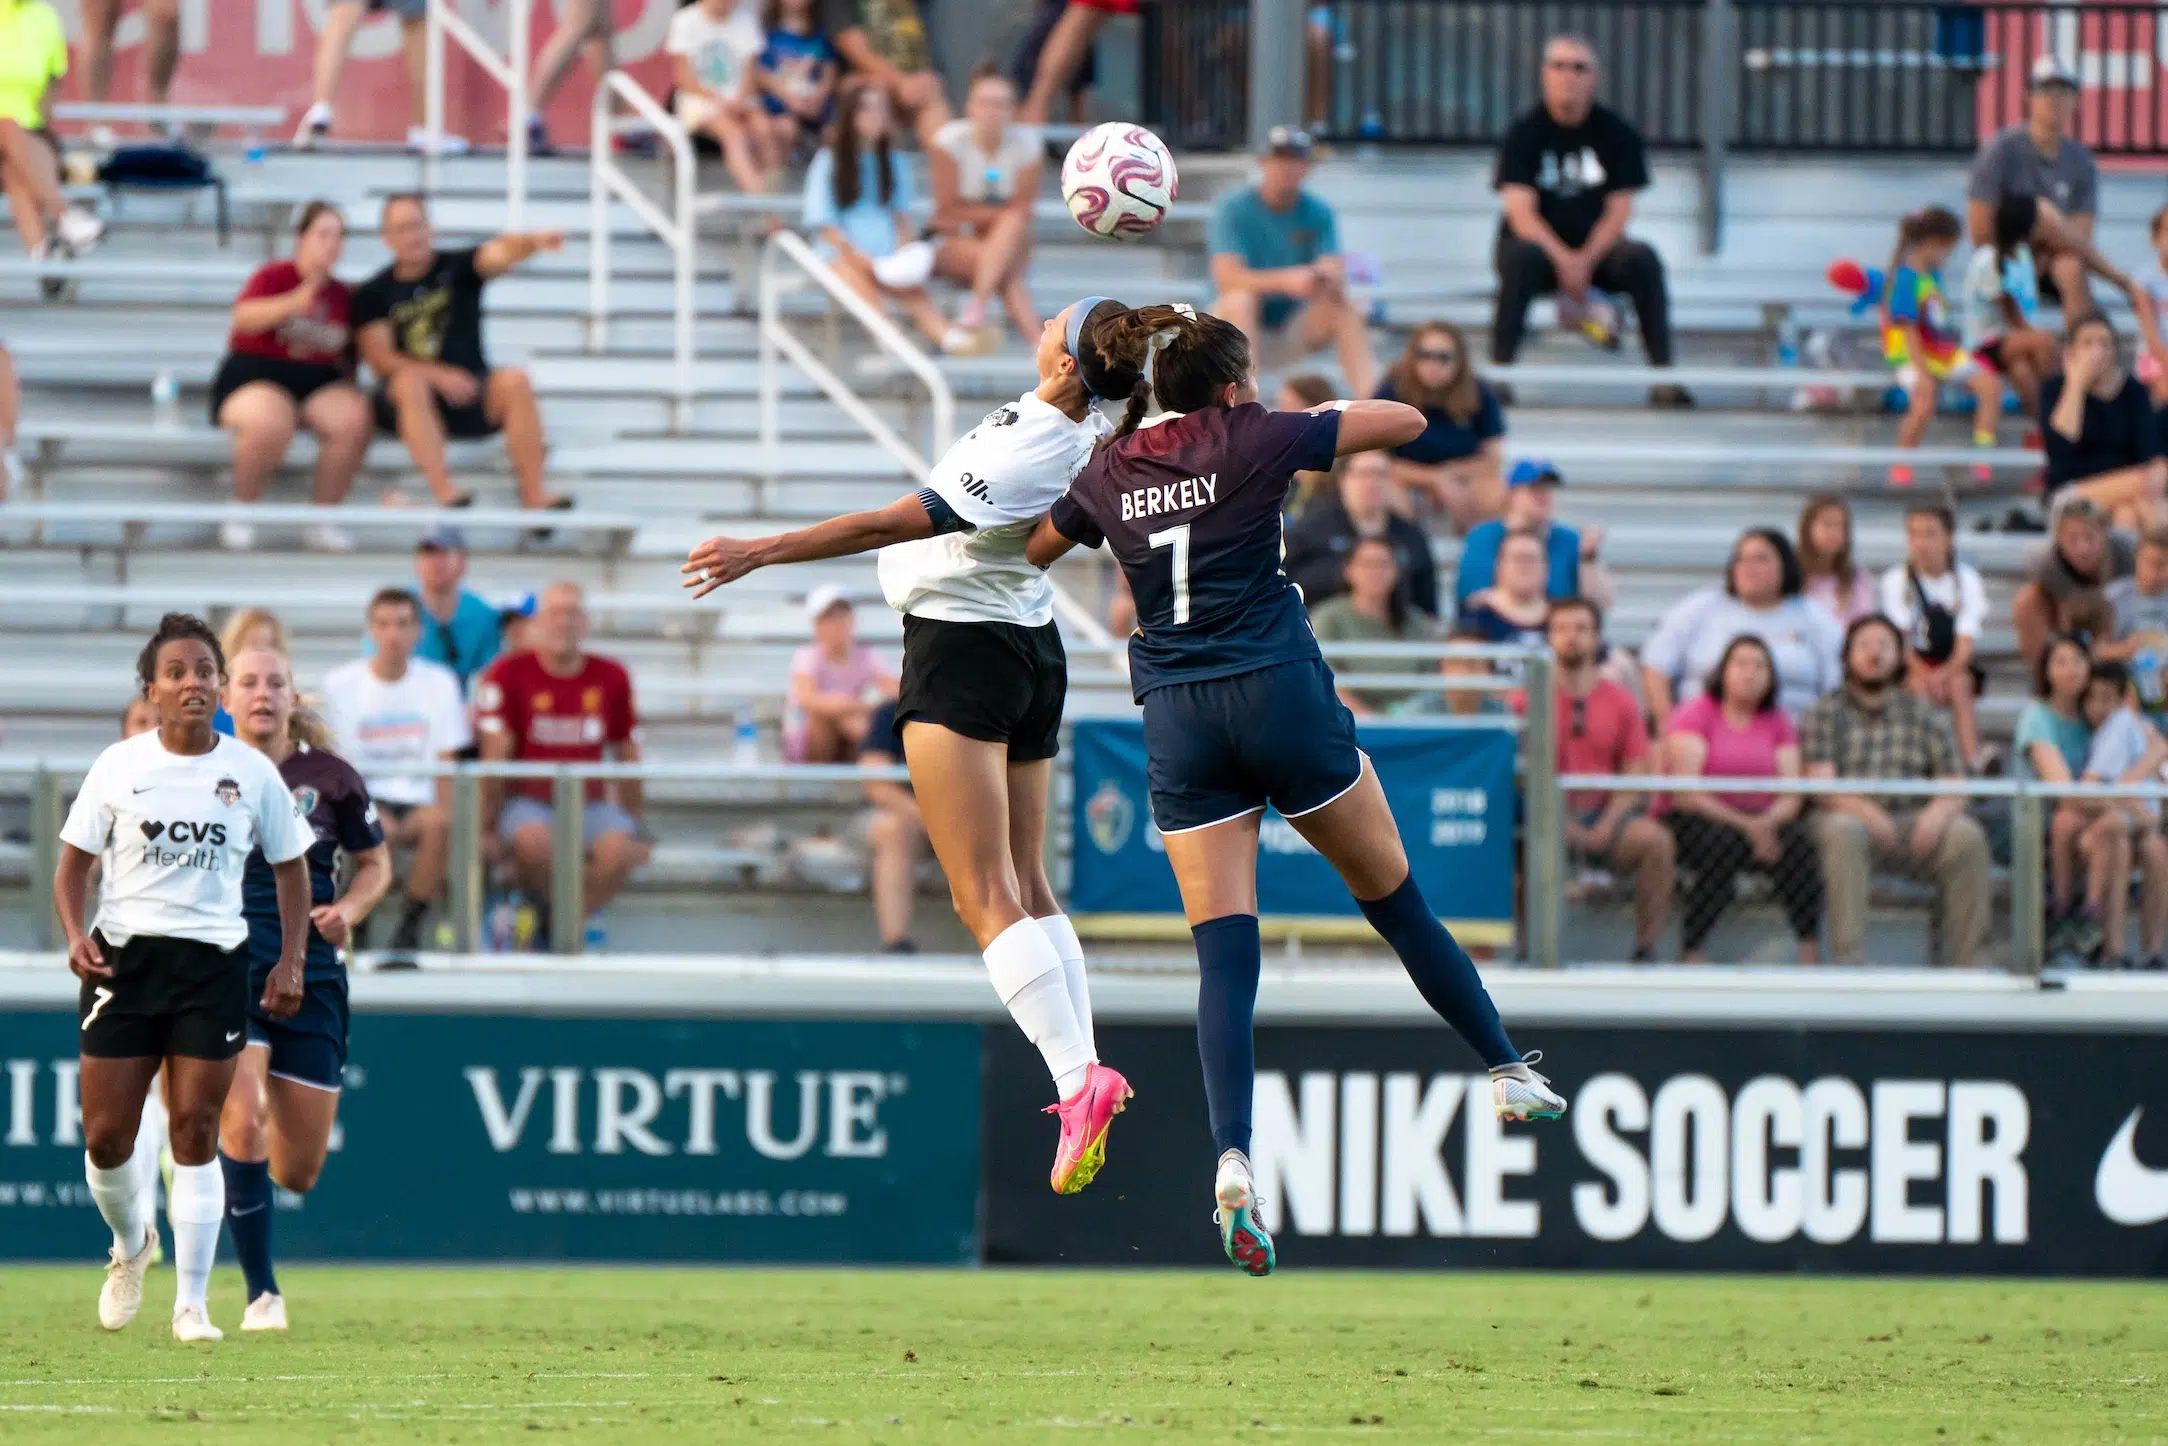 Ashley Hatch in a white uniforms battles for a header against a defender in a maroon to navy ombre uniform. The ball is approaching the two players who have jumped into the air.